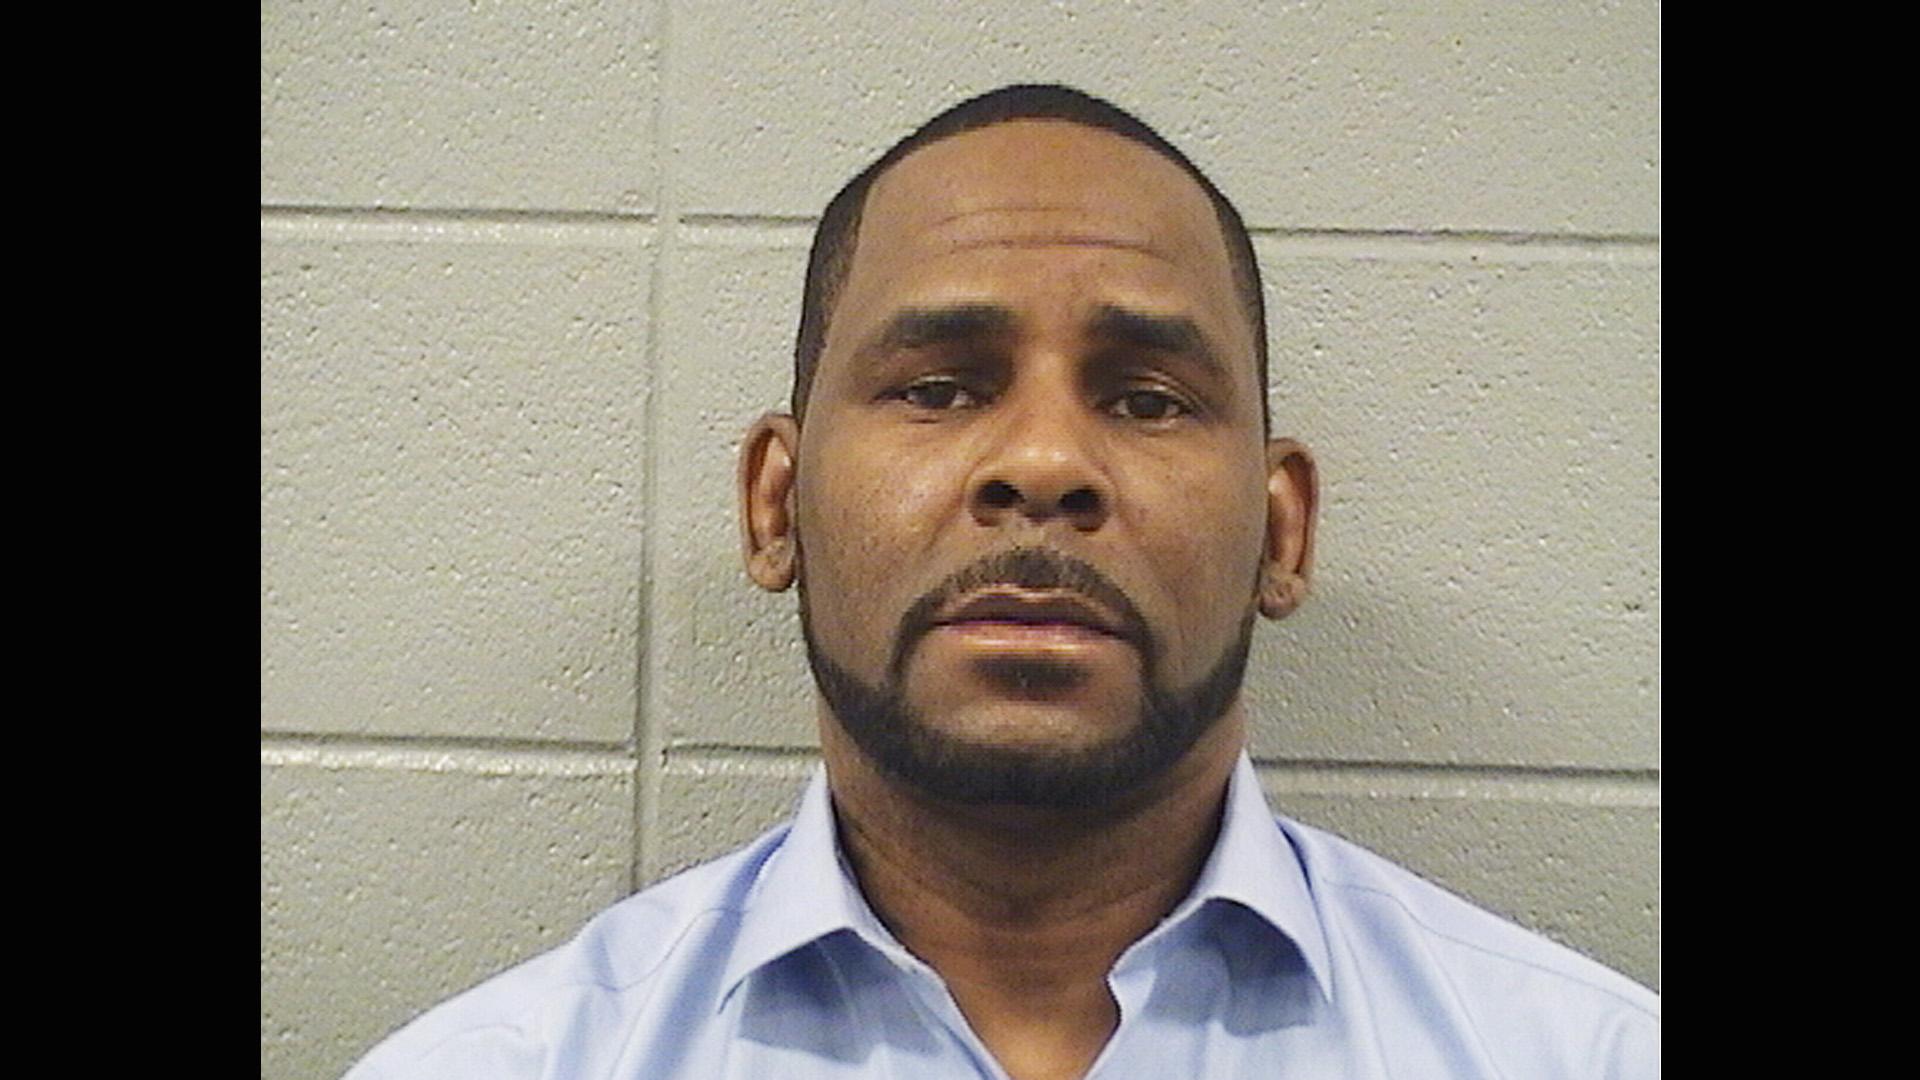 In this Wednesday, March 6, 2019 booking photo released by the Cook County Sheriff’s Office is R. Kelly. (Cook County Sheriff’s Office via AP)